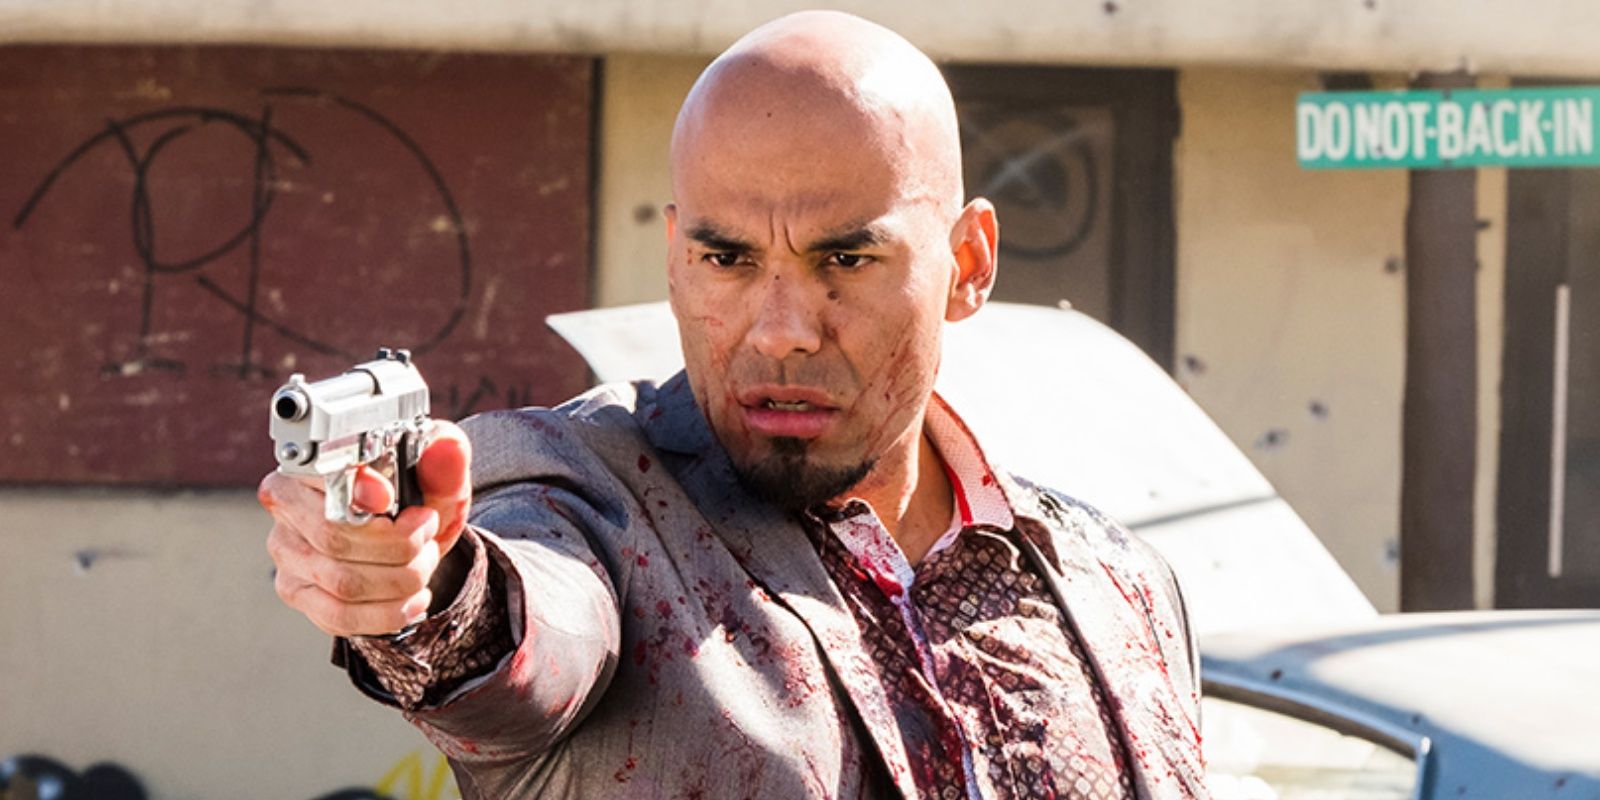 Salamanca cousin aiming gun and covered in blood in Better Call Saul